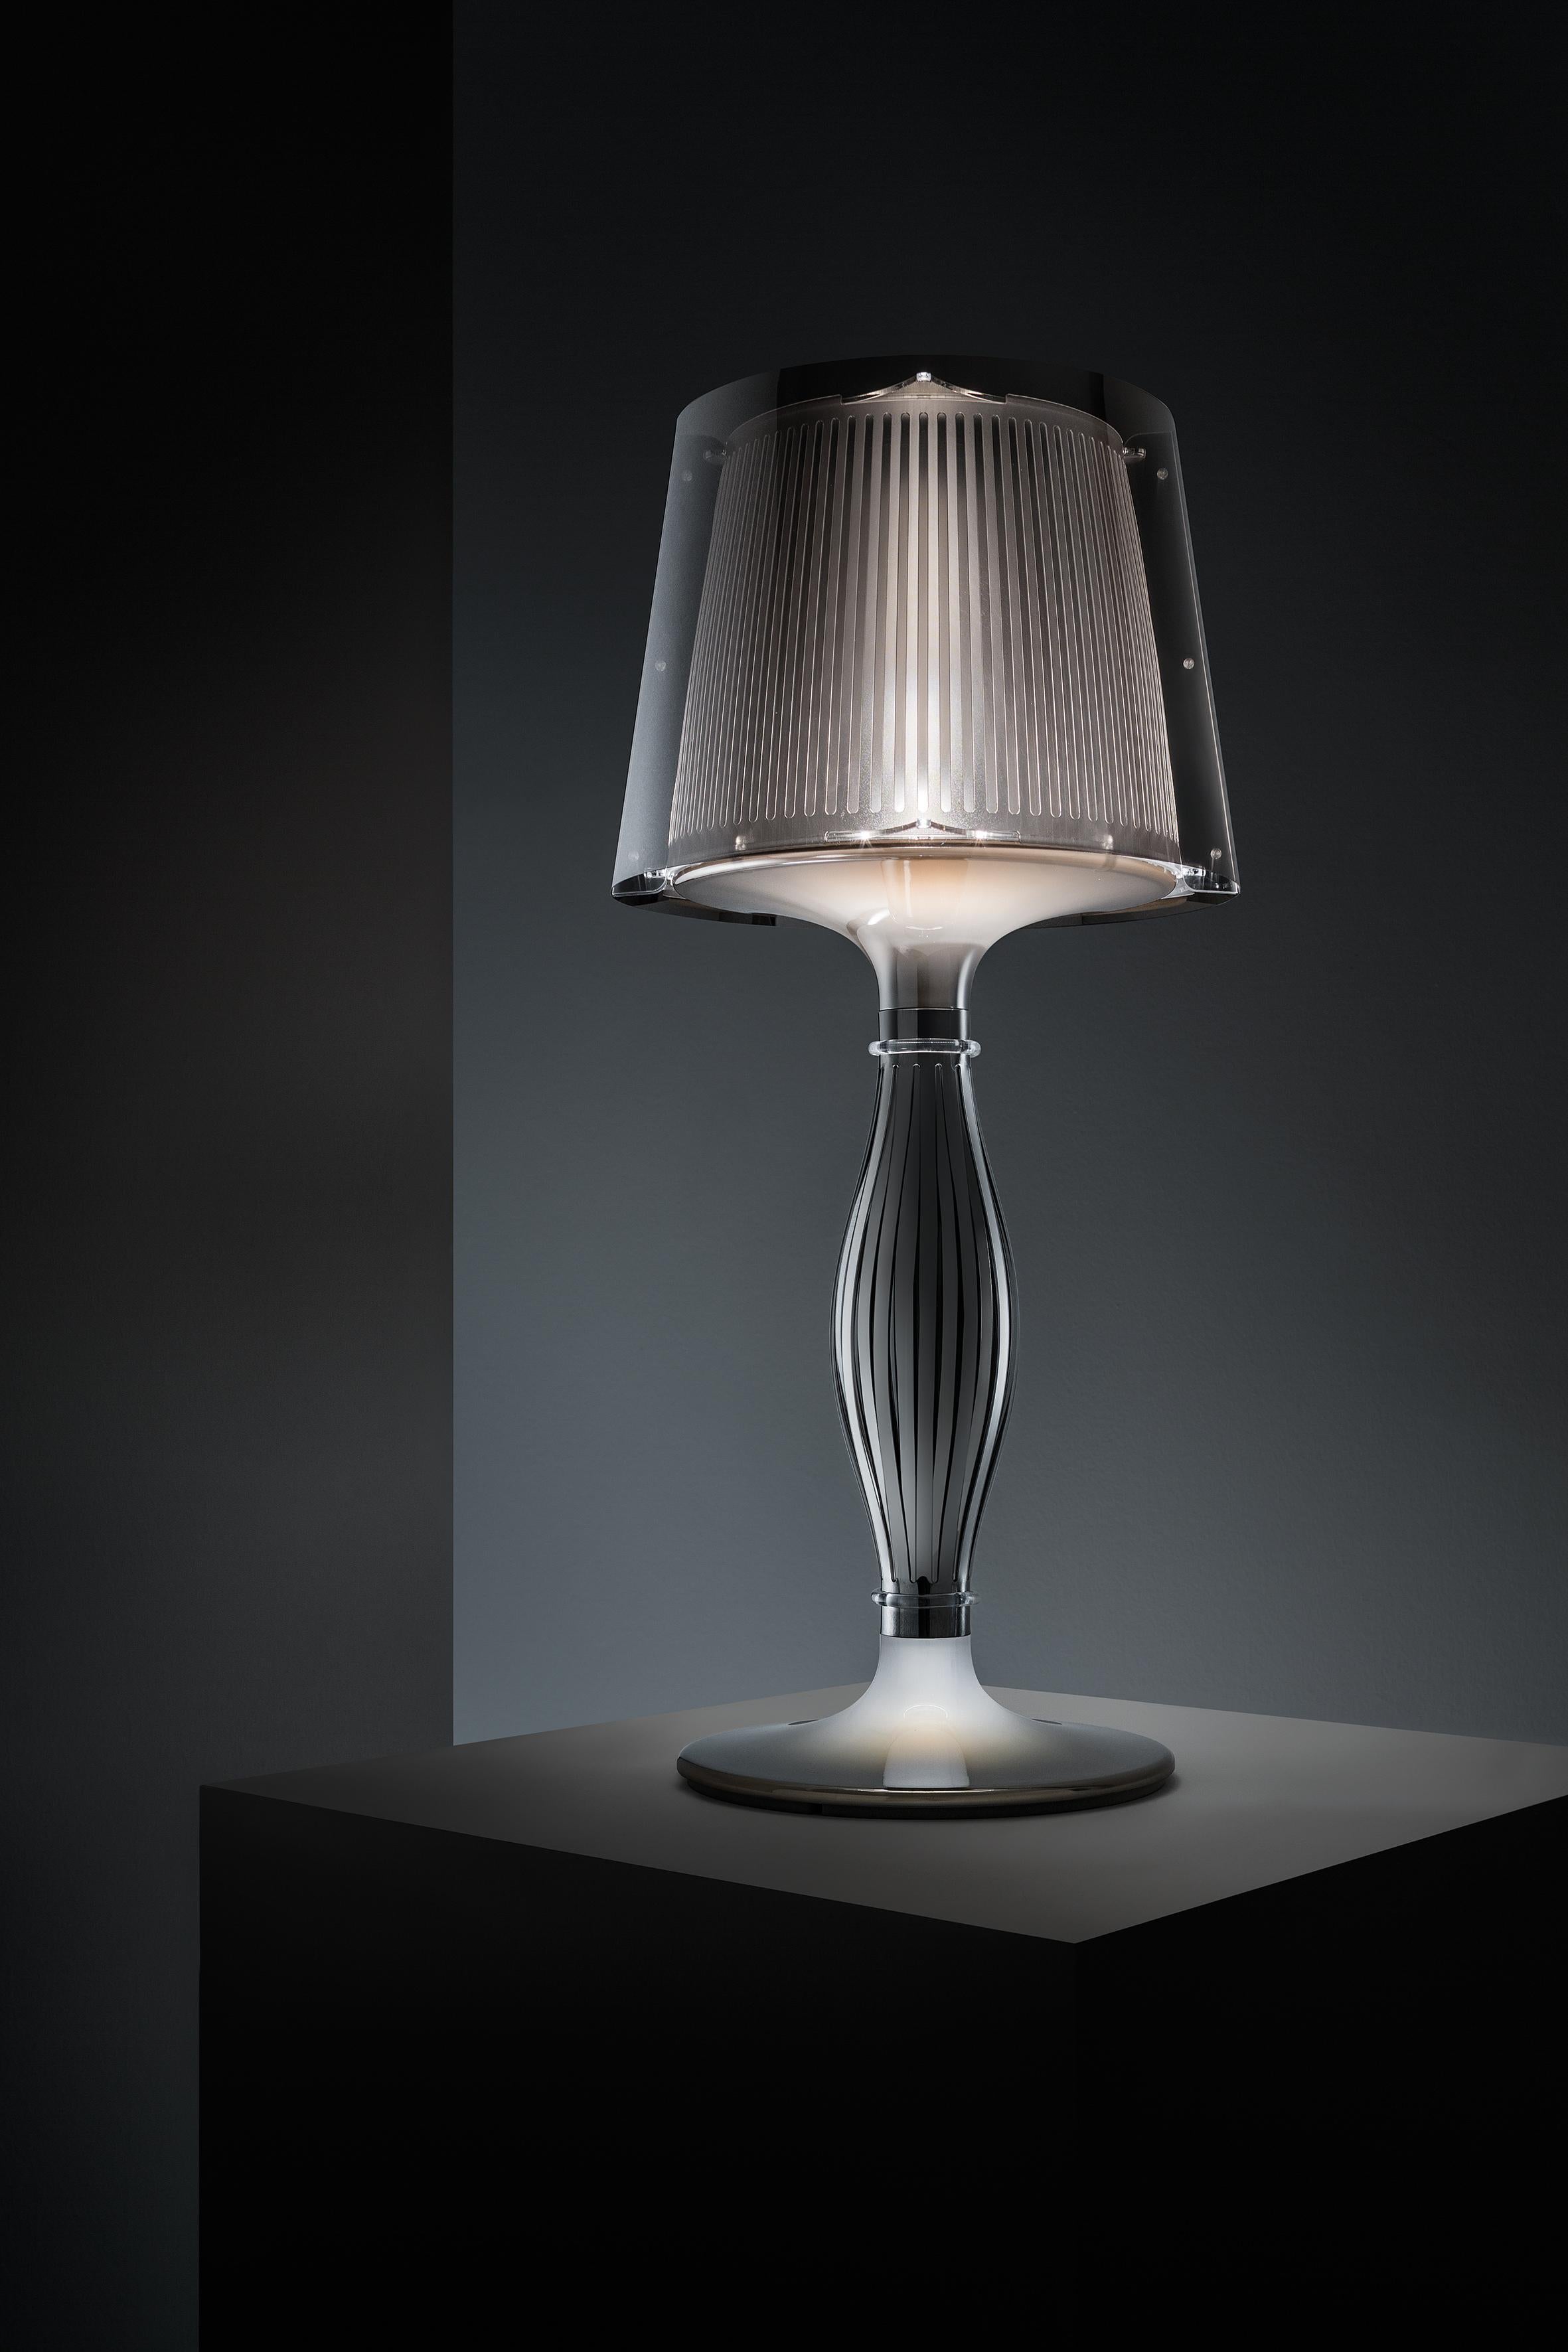 The masterpiece of the Liza collection is the iconic, baroque-inspired table lamp, available in the classic Prisma version, as well as a new Pewter version, both using SLAMP’s patented techno-polymer materials. Liza has a double illumination system,